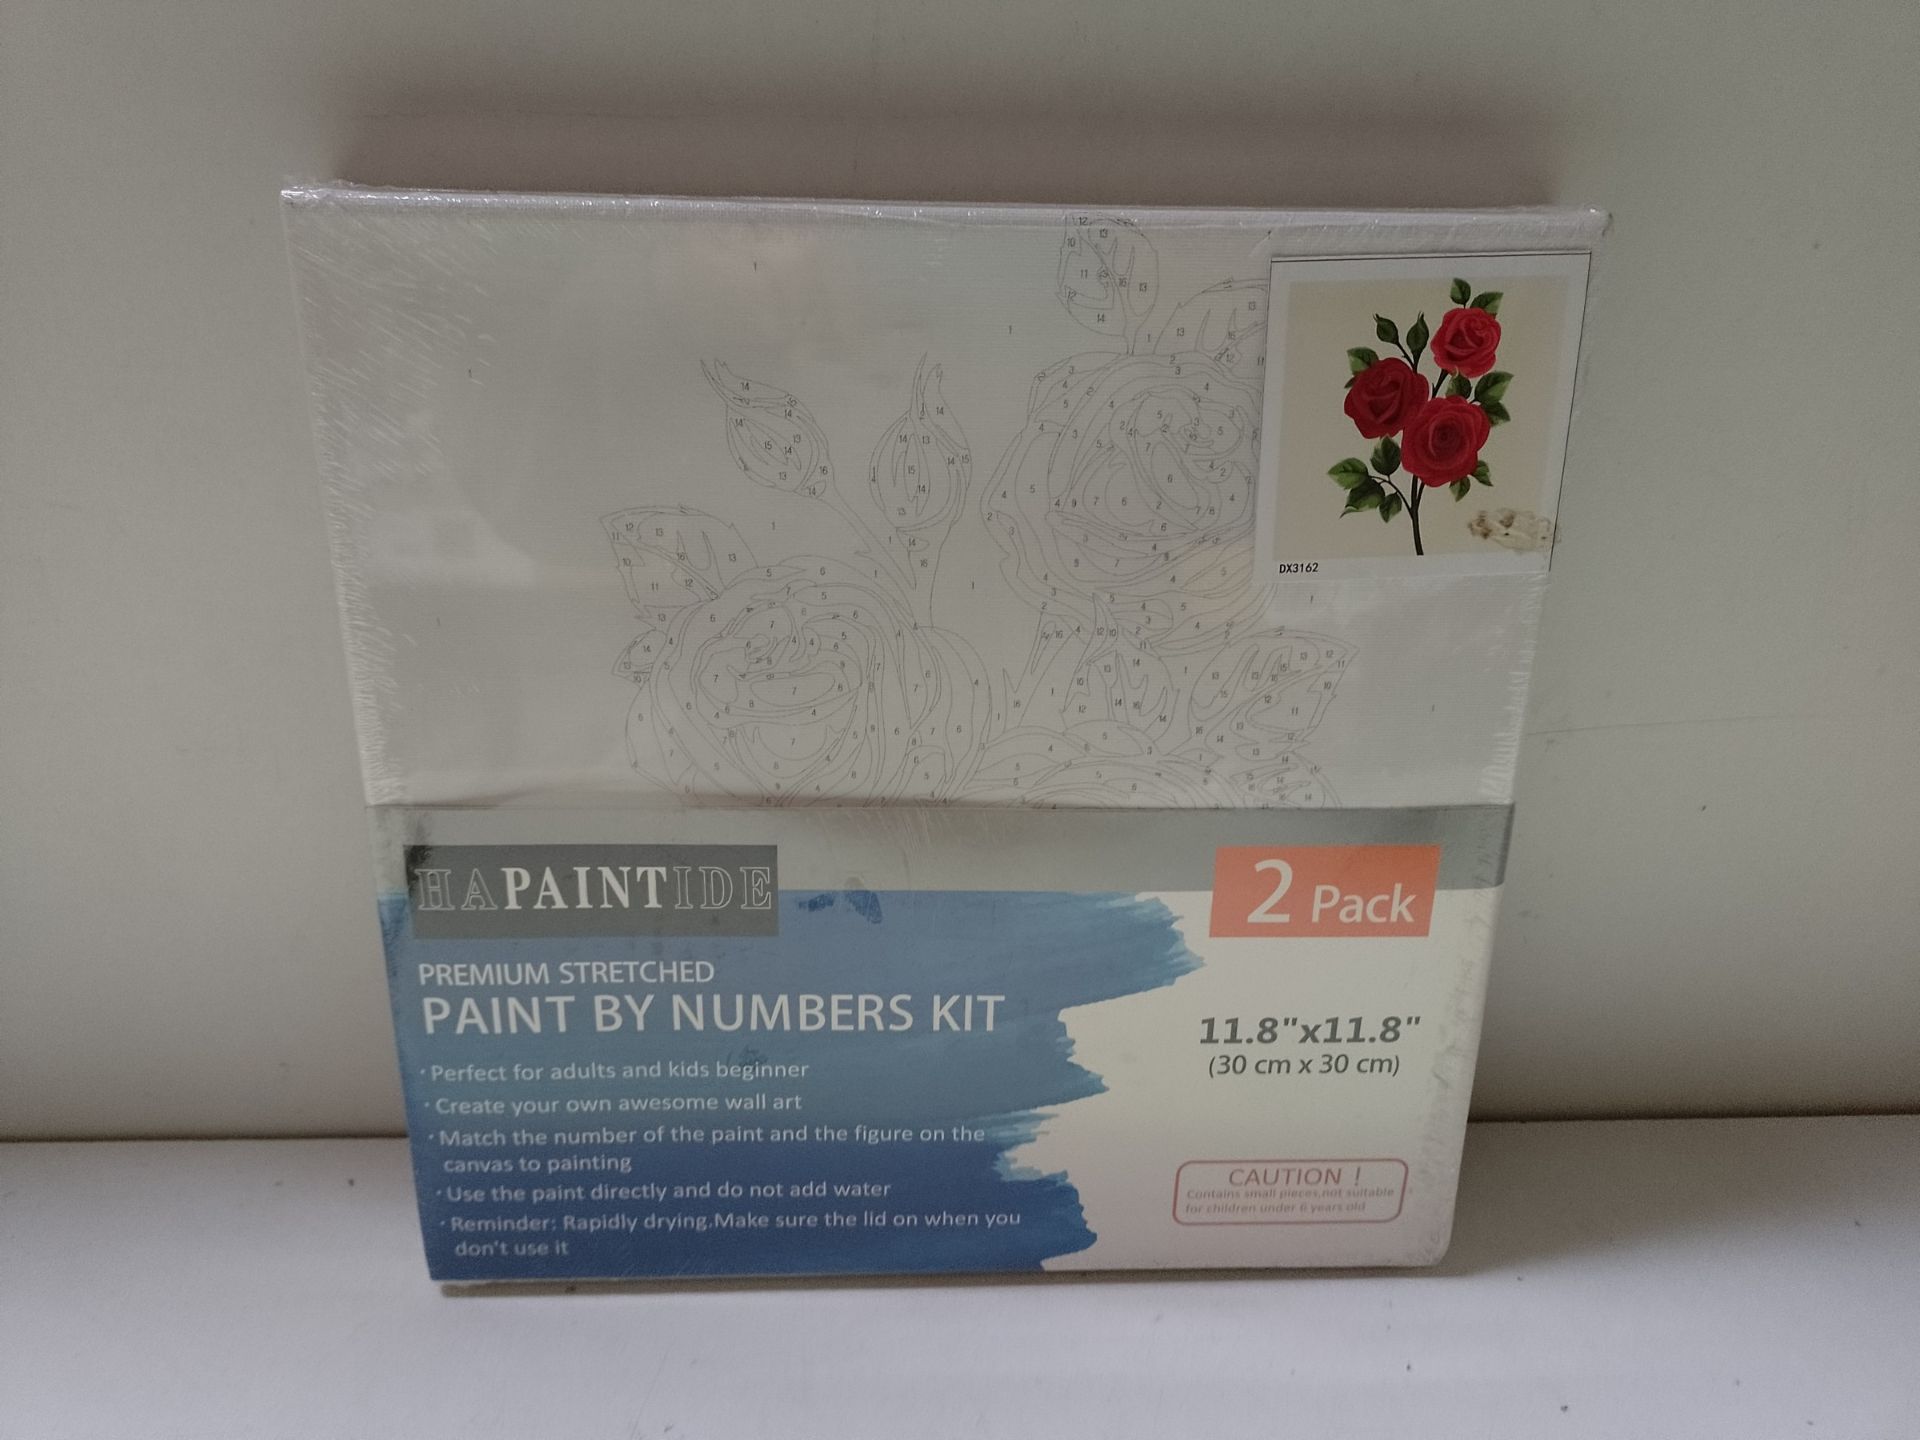 RRP £49.90 Total, Lot Consisting of 2 Items - See Description. - Image 2 of 2